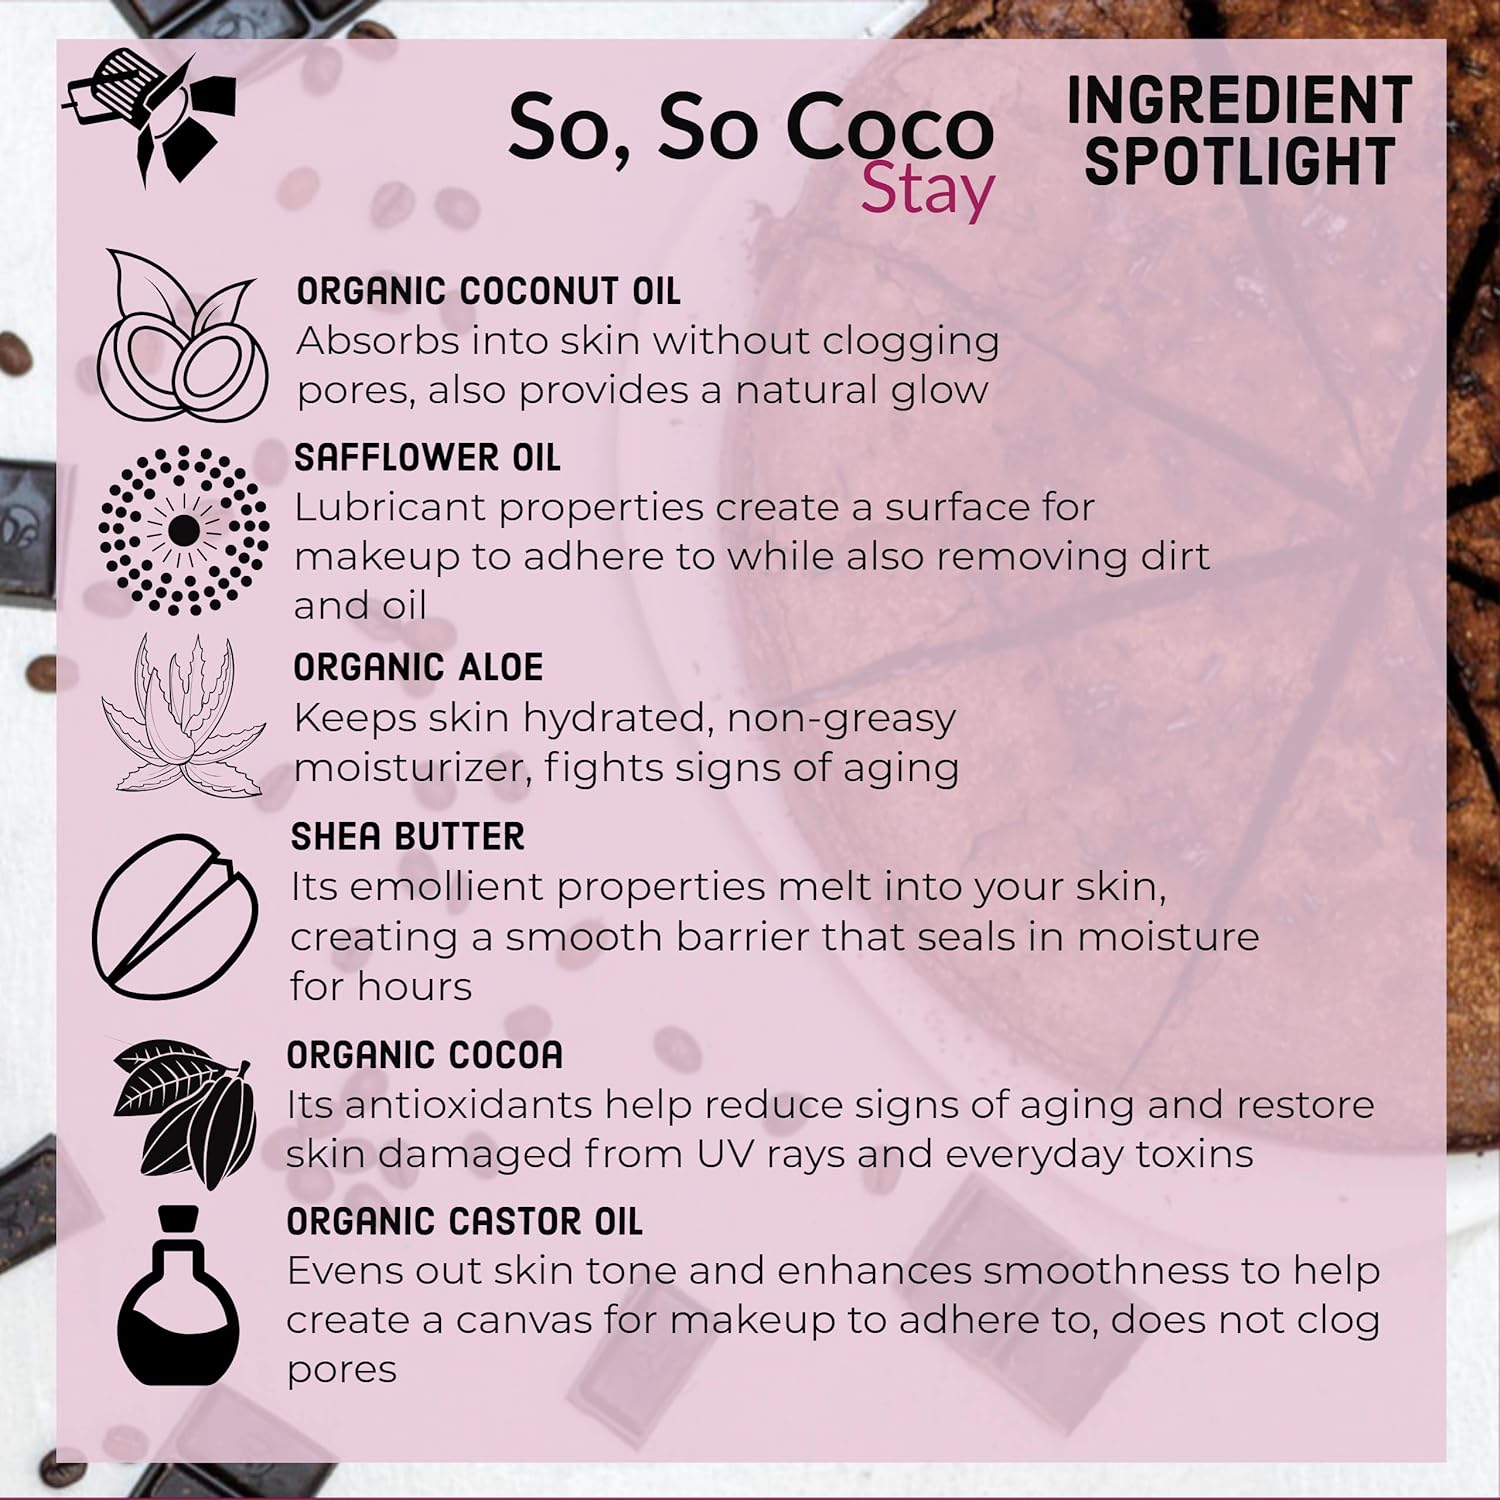  Be Fancy So, So Coco Stay Makeup Primer & Face Moisturizer Cream with Coconut Oil, Cocoa, Shea Butter, Hydrating, Dry to Oily Skin, Silicone-Free, 2 fl oz